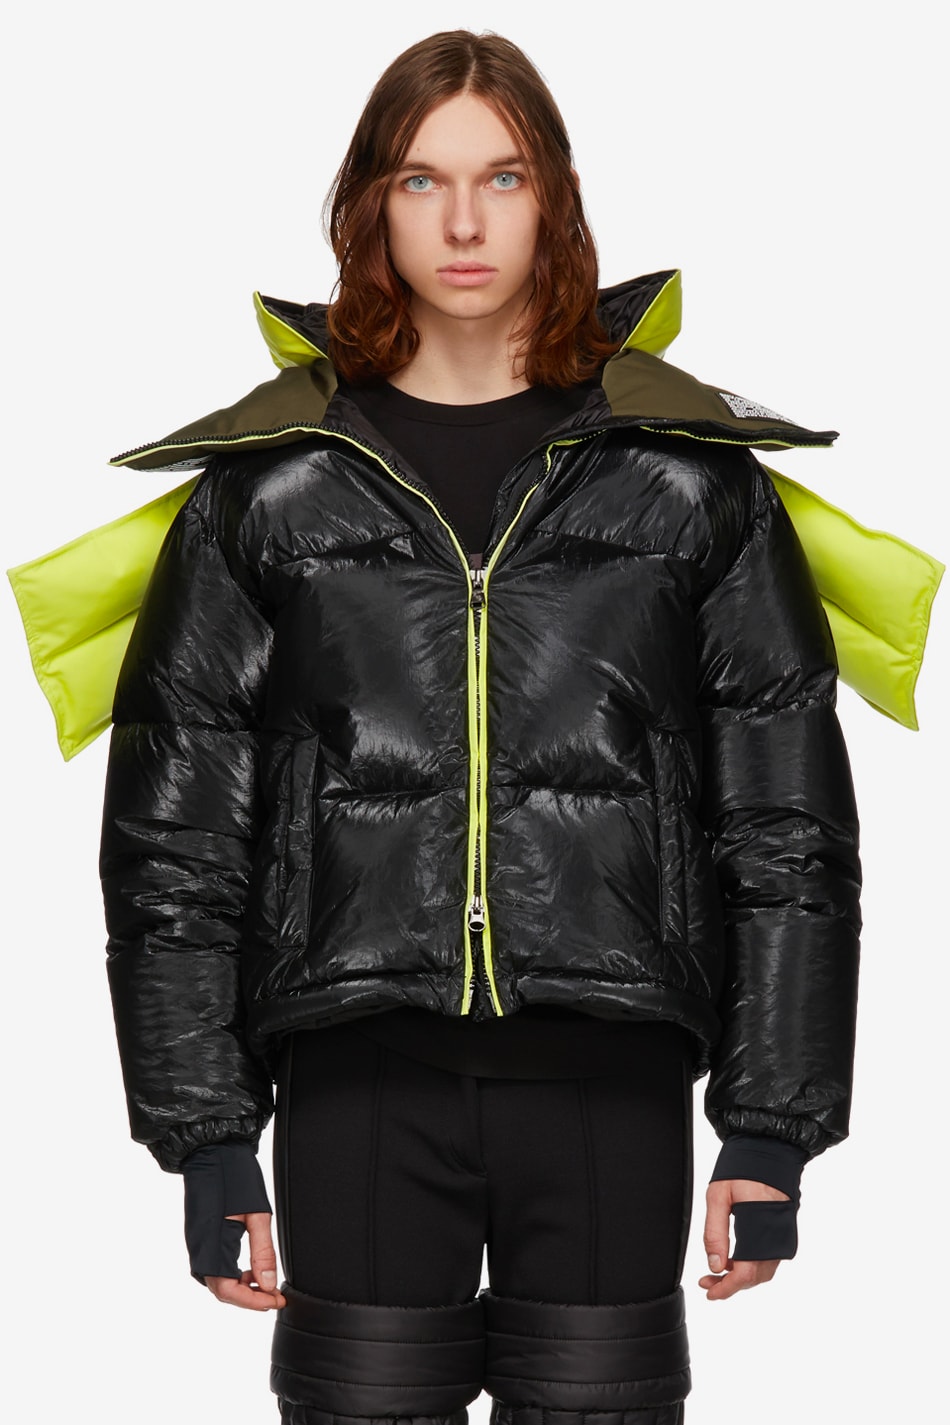 Colmar A.G.E. by Shayne Oliver FW18 Outerwear Fall Winter 2018 Quilter Trousers Tyvek Concept Coat Villa Ski Hoodie Christye Jacket Shell Vest Long Down Pink Yellow Green Grey Hood By Air